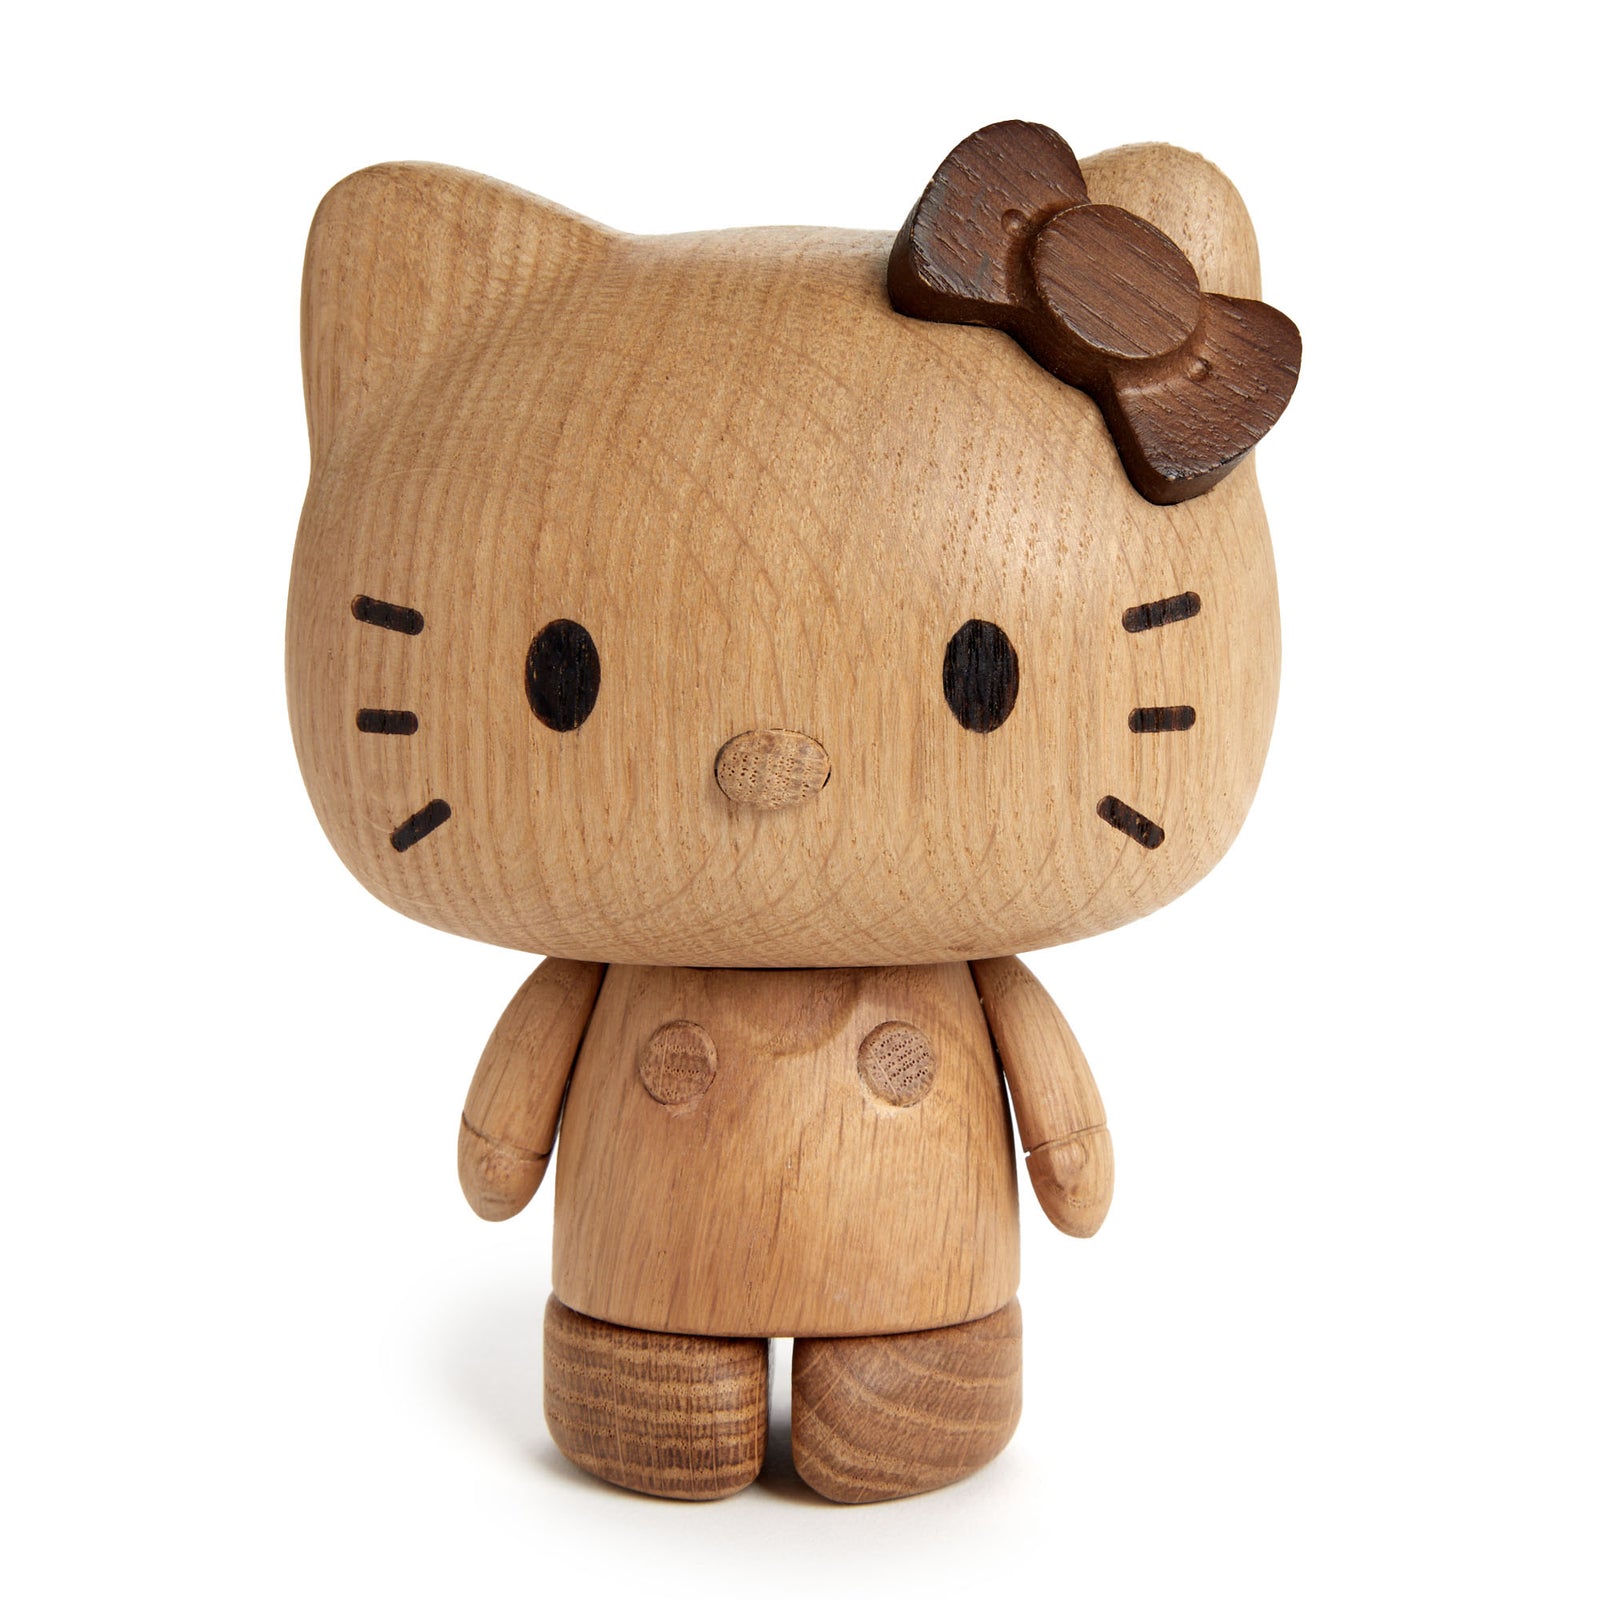 SANRIO BEYOND THE PANDEMIC: AN EVENTFUL 2022 FOR HELLO KITTY AND